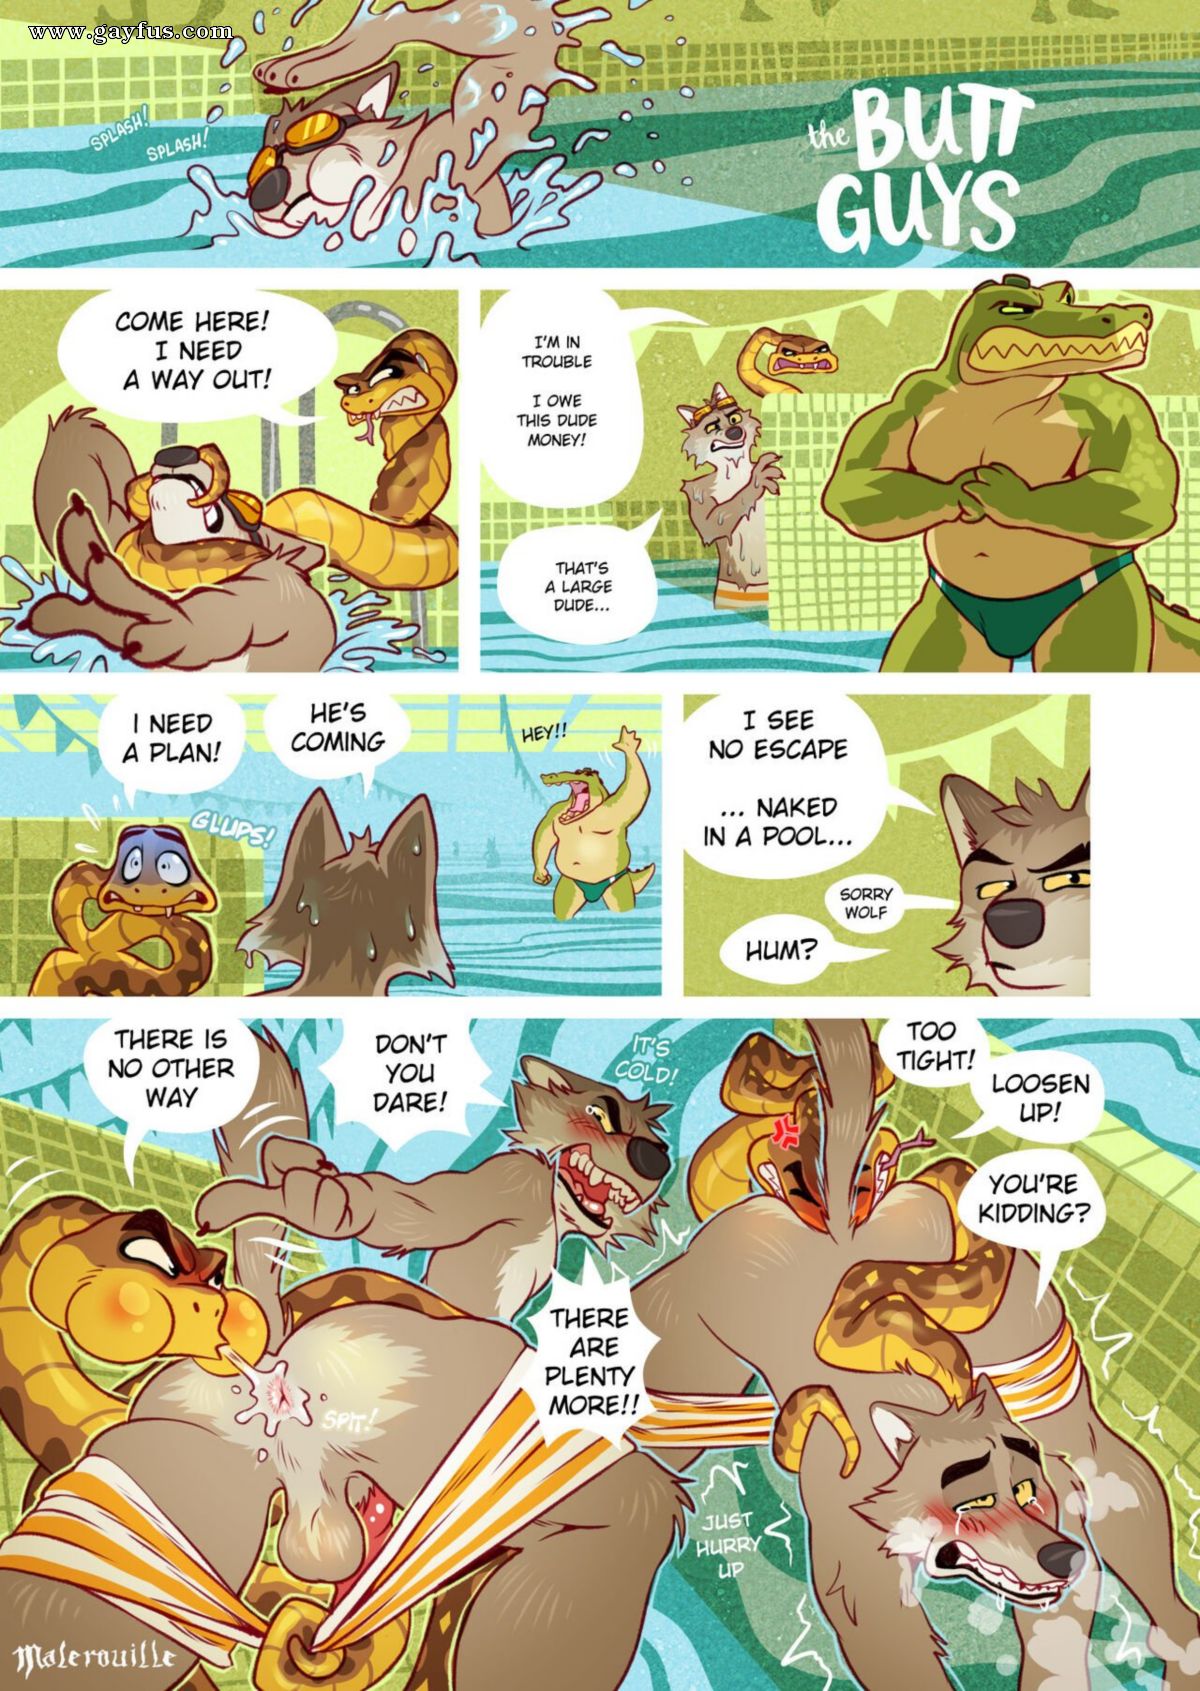 Massage Gay Furry Porn Comic - Page 1 | Malerouille/The-Butt-Guys | Gayfus - Gay Sex and Porn Comics